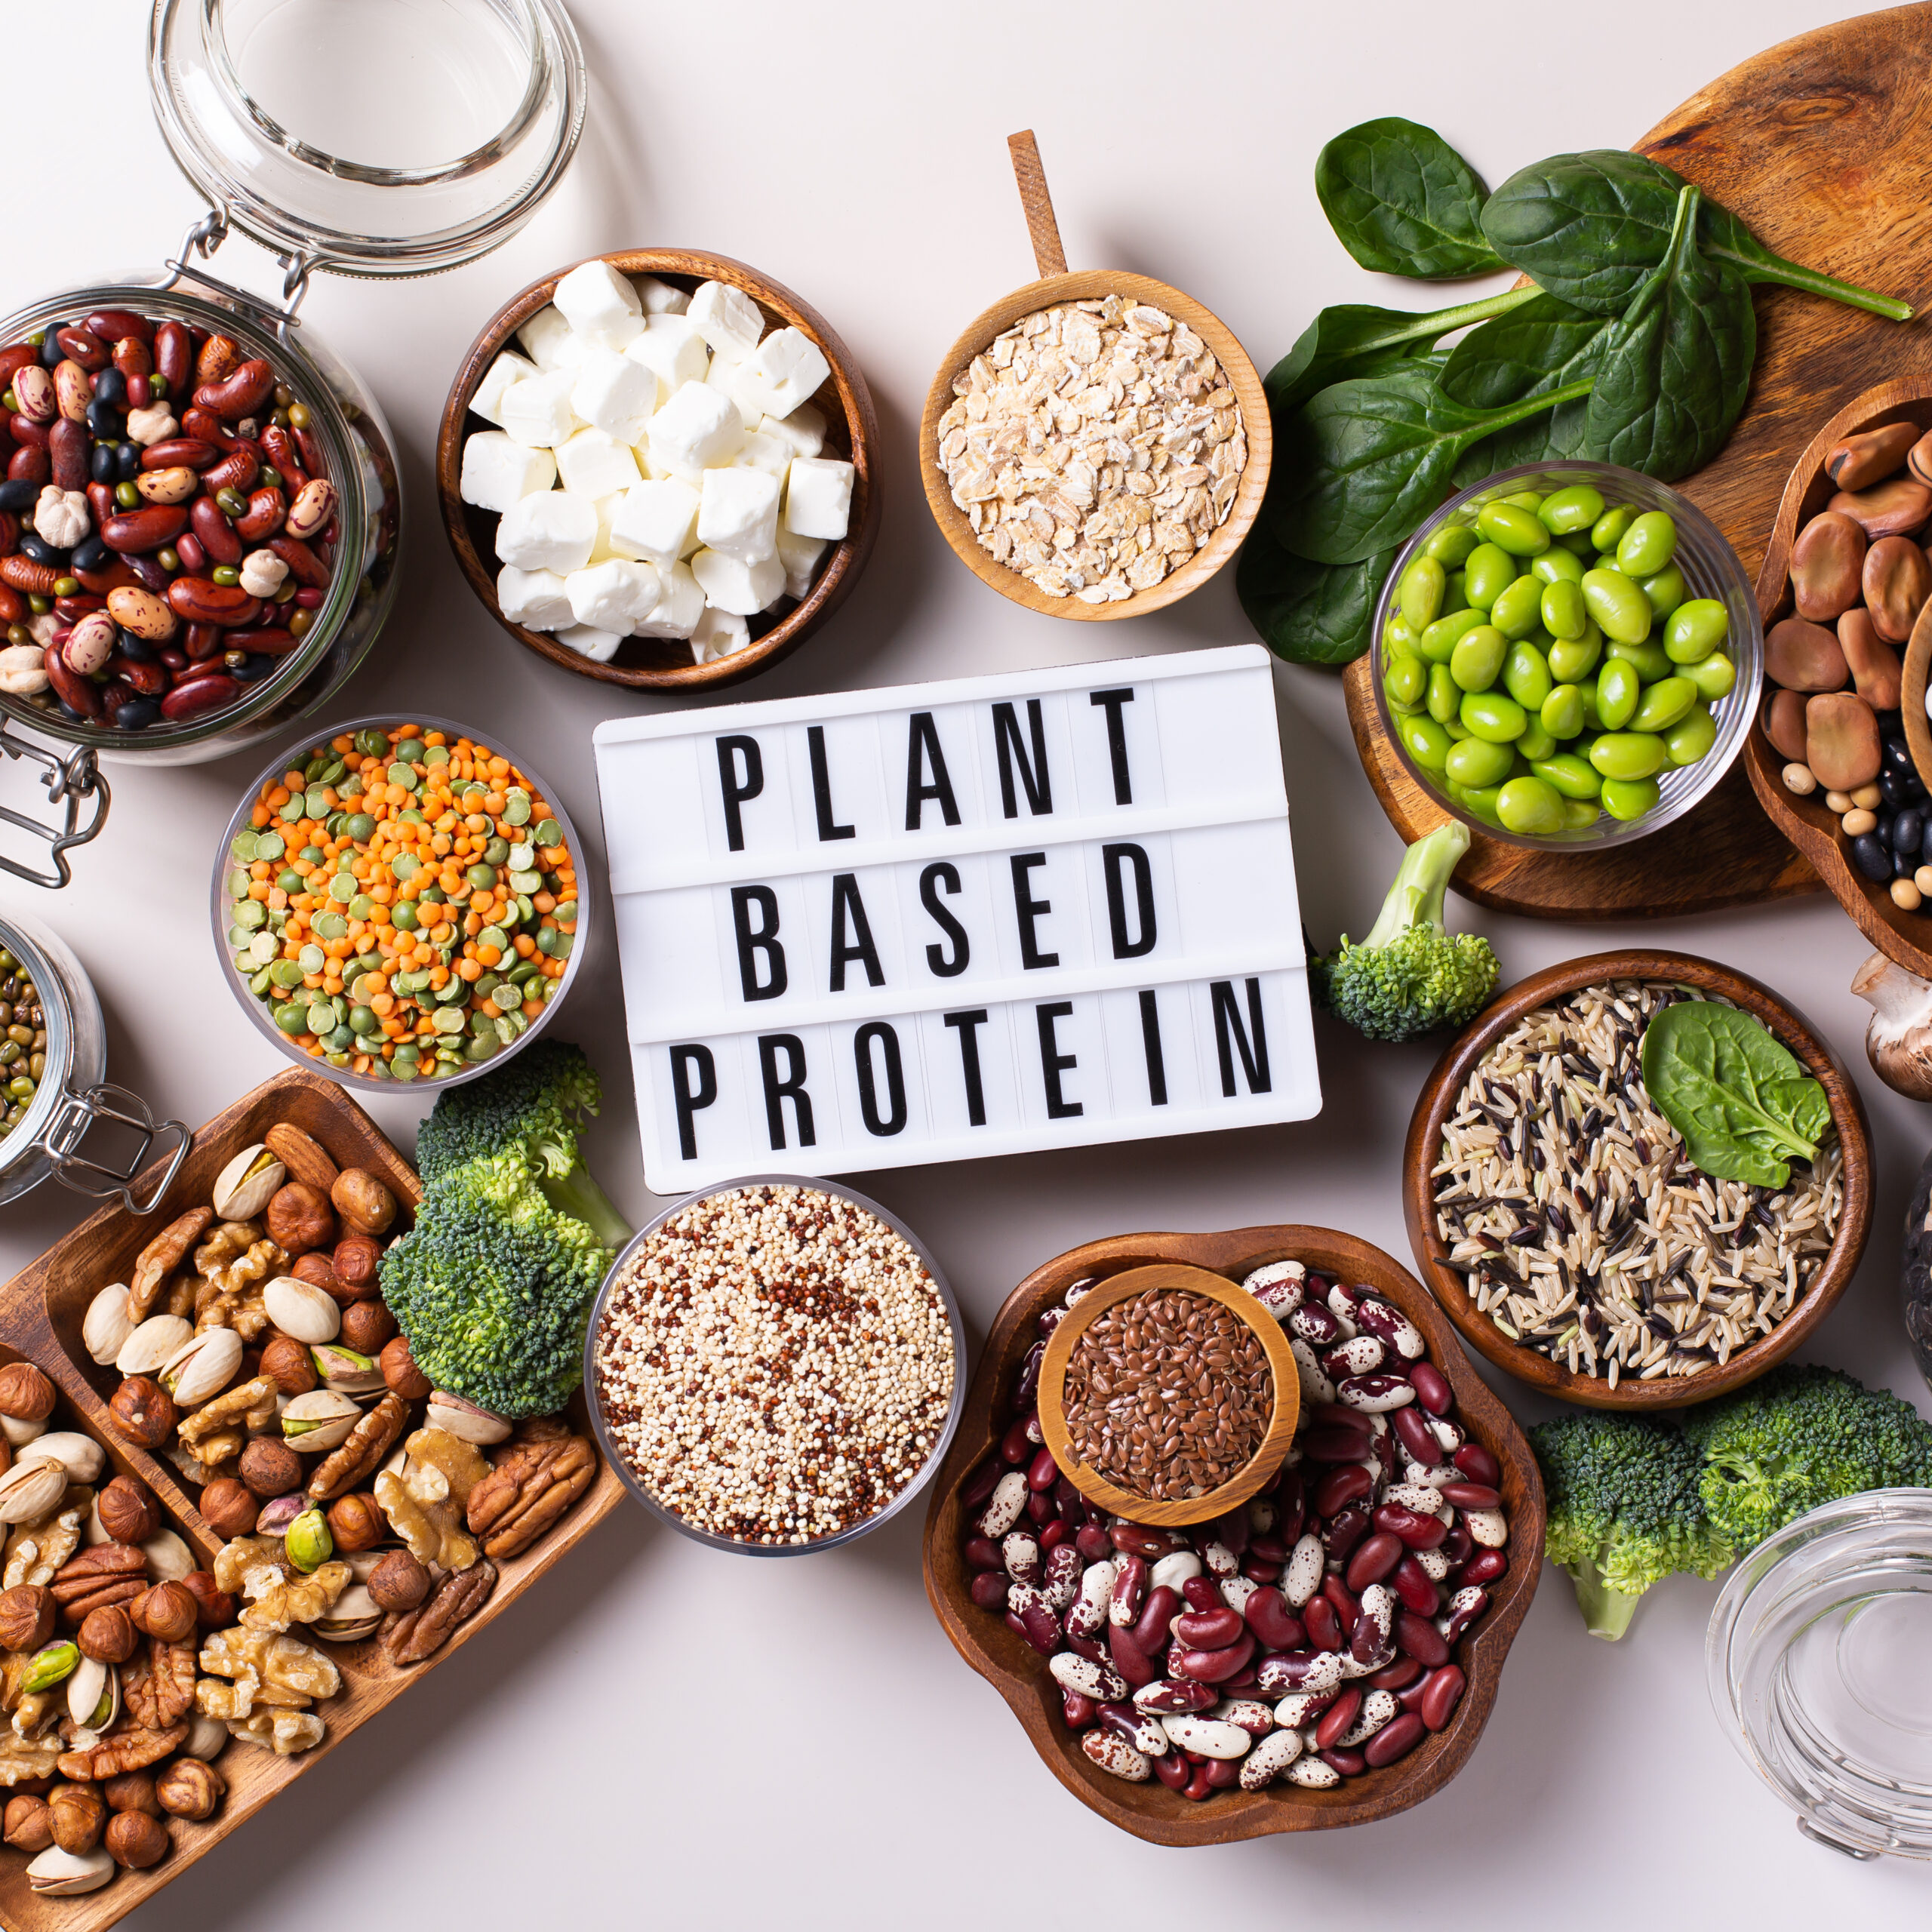 Variety of Plant-Based Protein Foods, legumes, nuts, whole grains